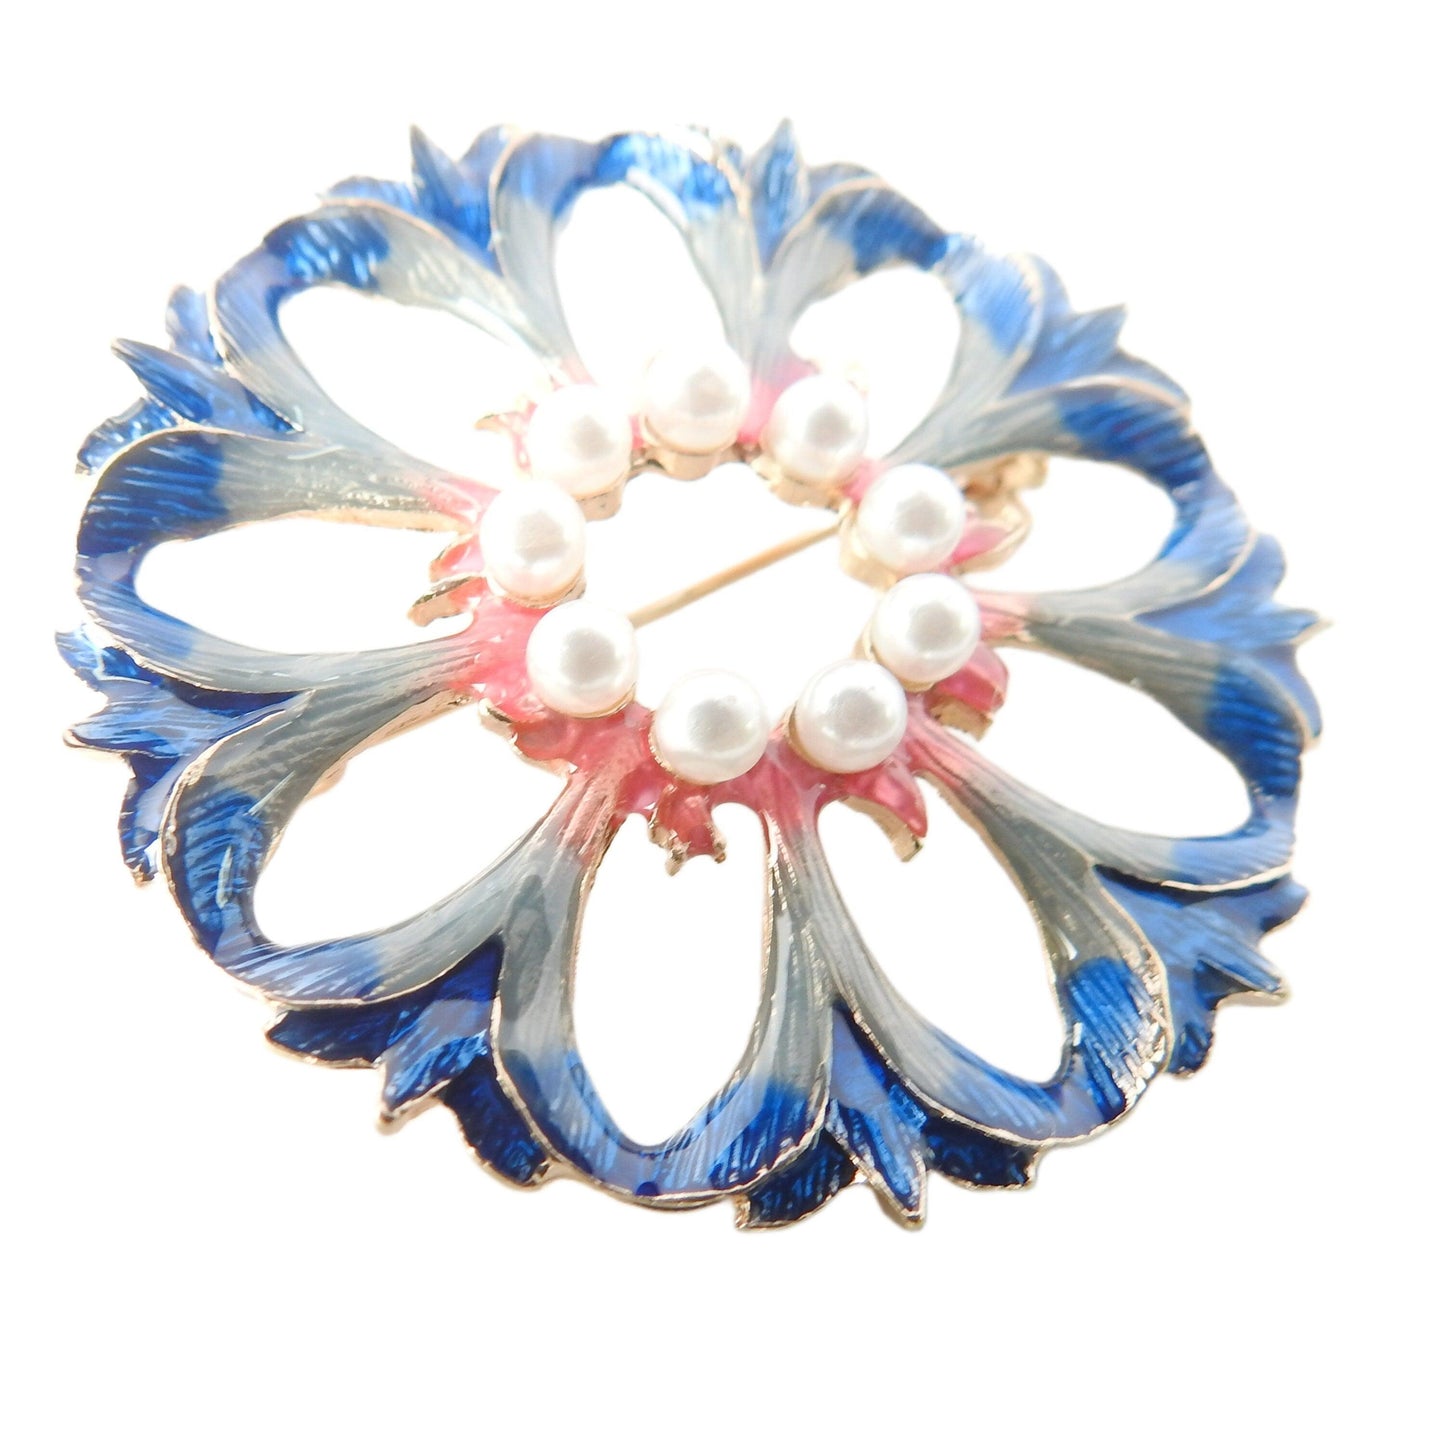 Round blue pearl brooch for women. Embellishment for a wedding bouquet and formal events. Something blue gift for bride. 50 mm, 2 inches